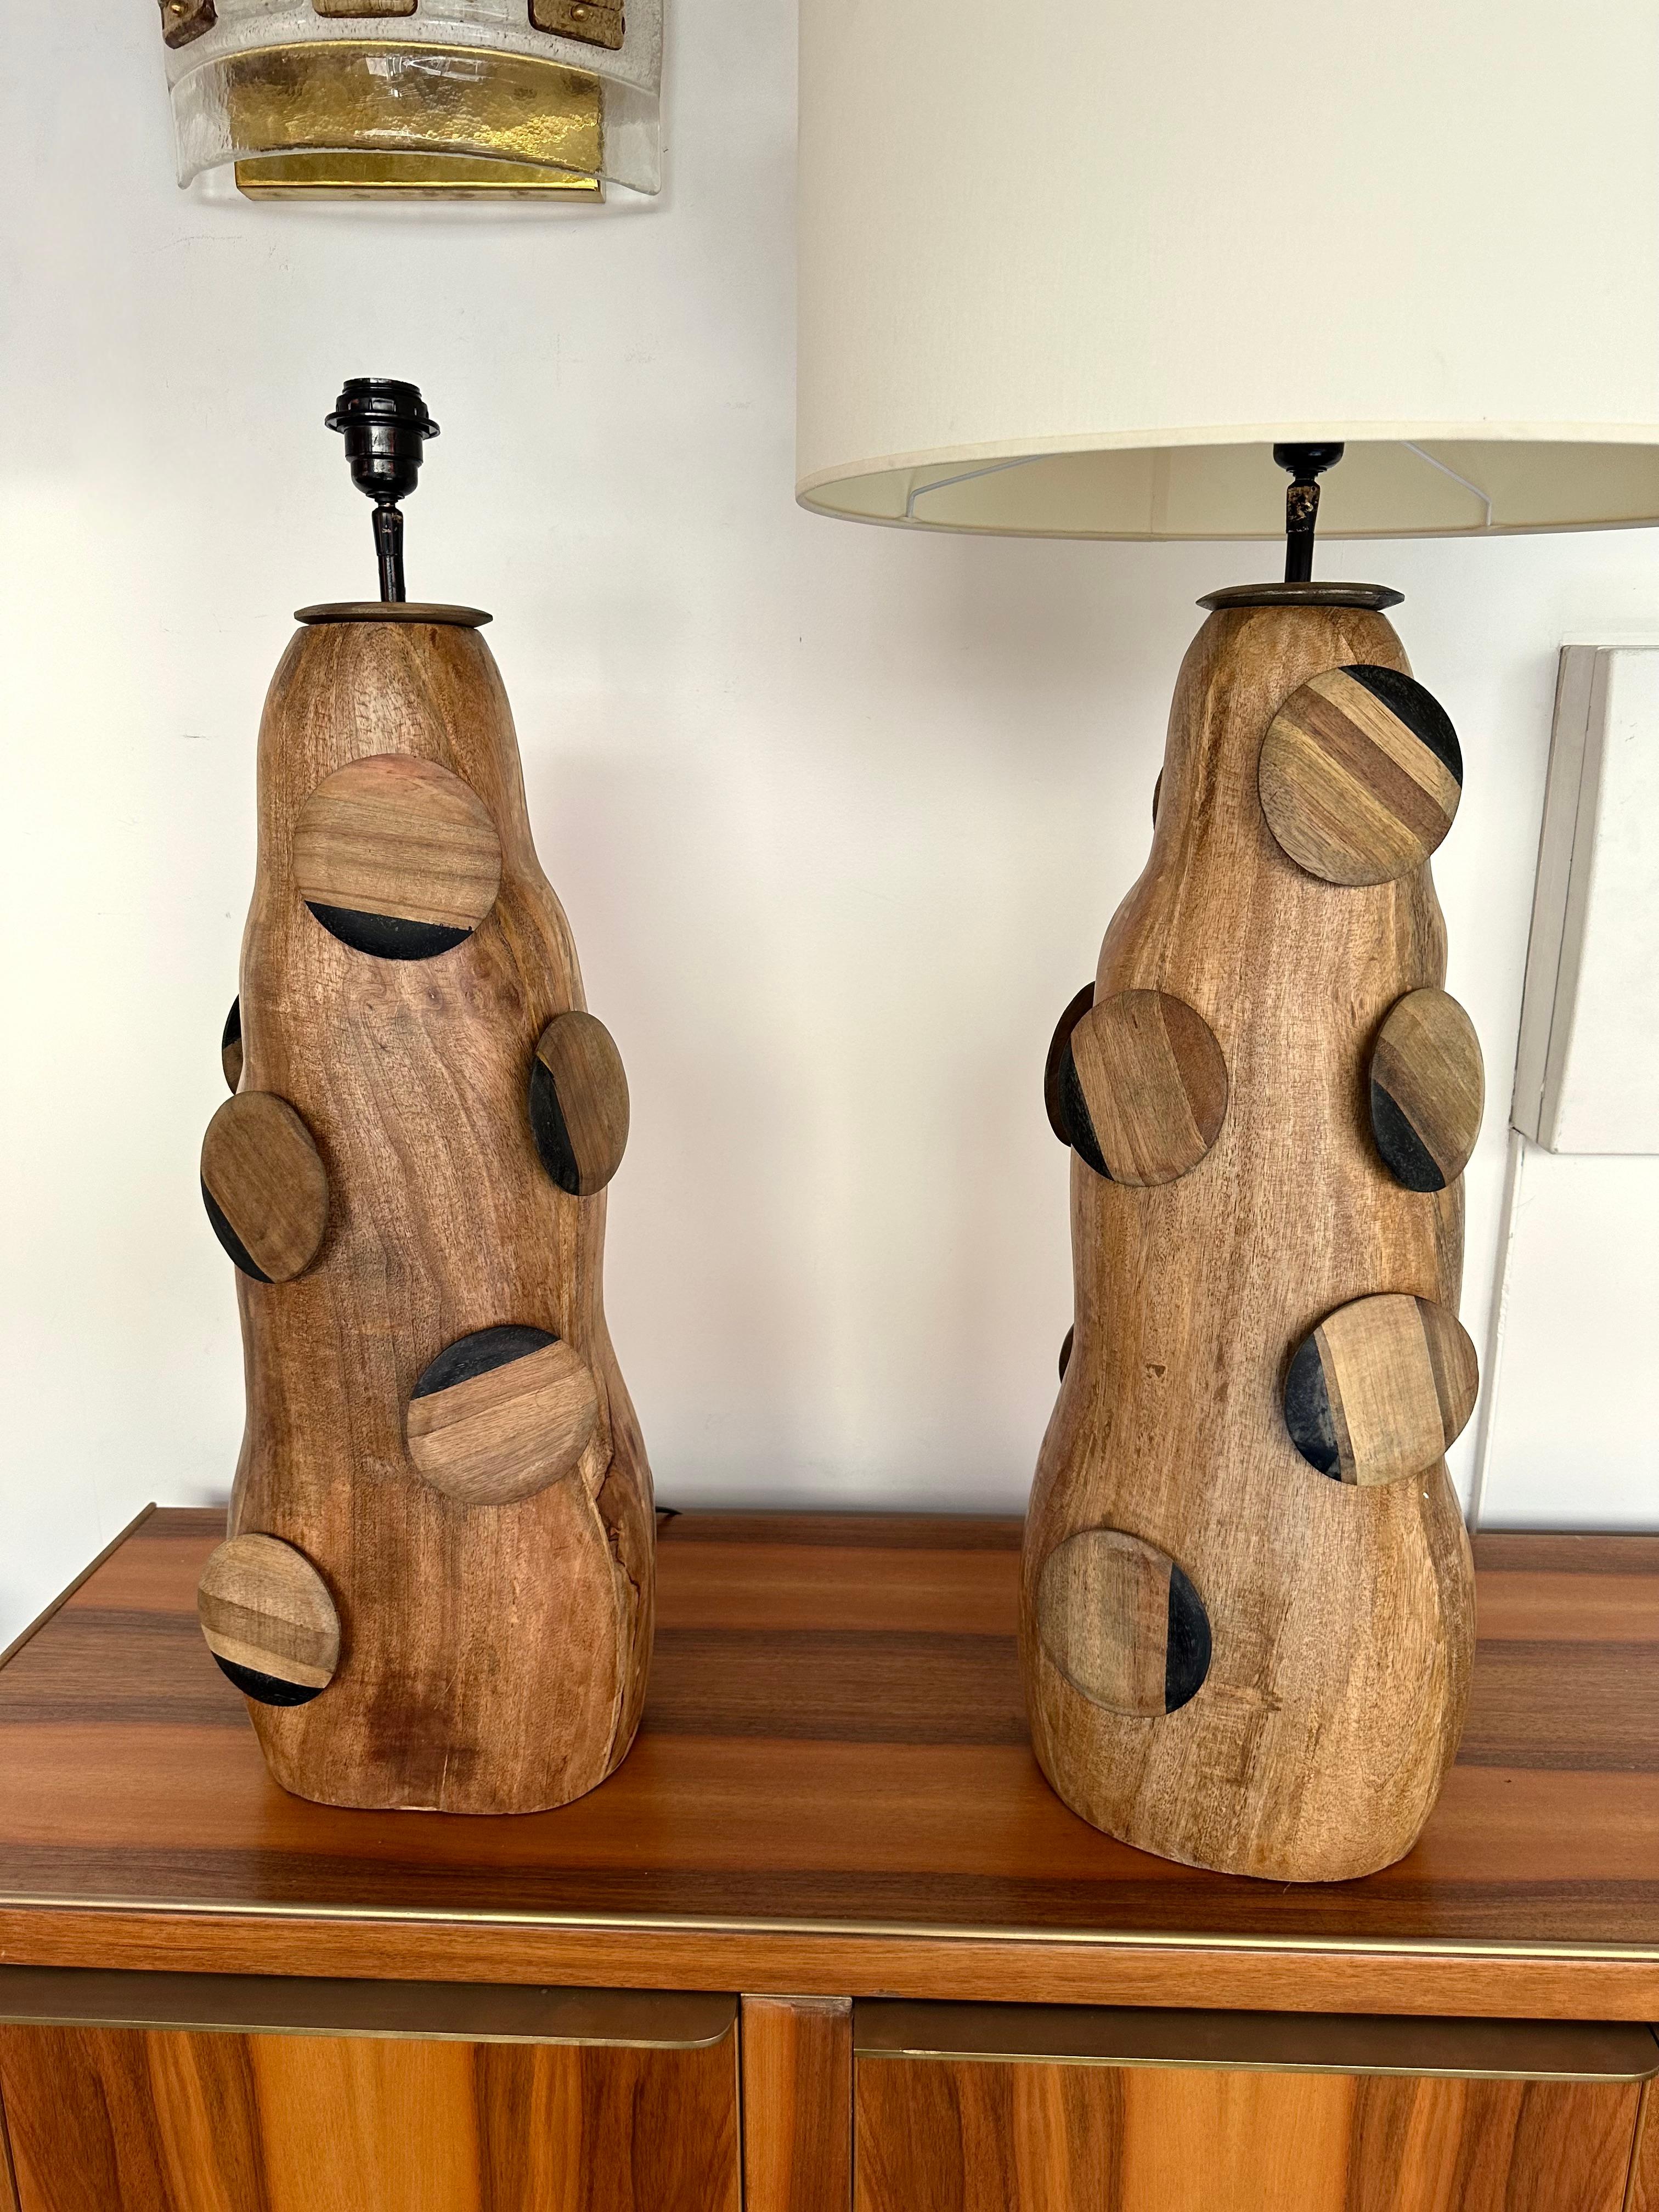 Italian Contemporary Pair of Wood Discs Lamps, Italy For Sale